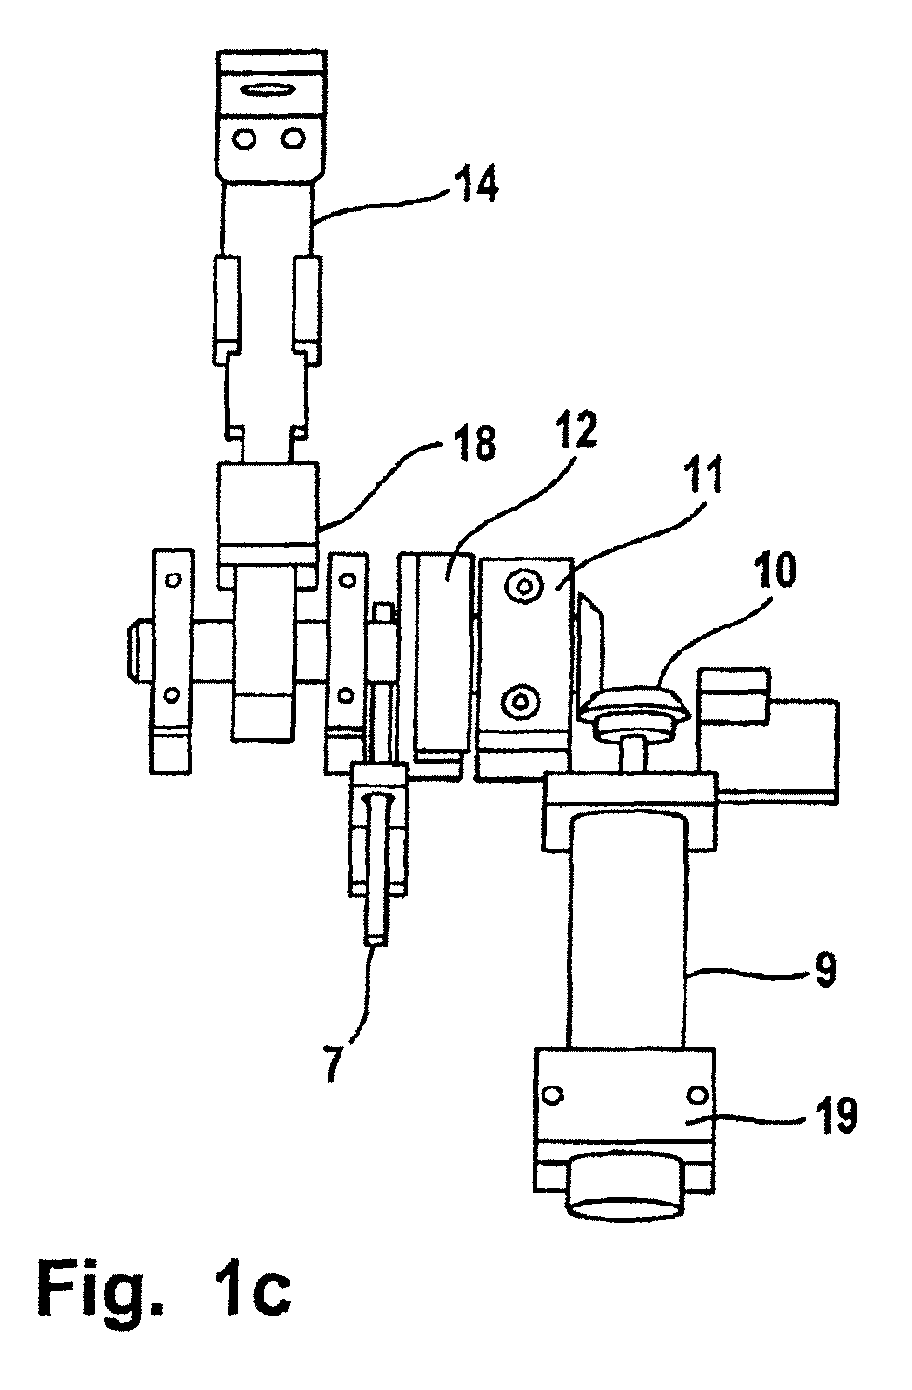 Integrated device for diagnostic purposes